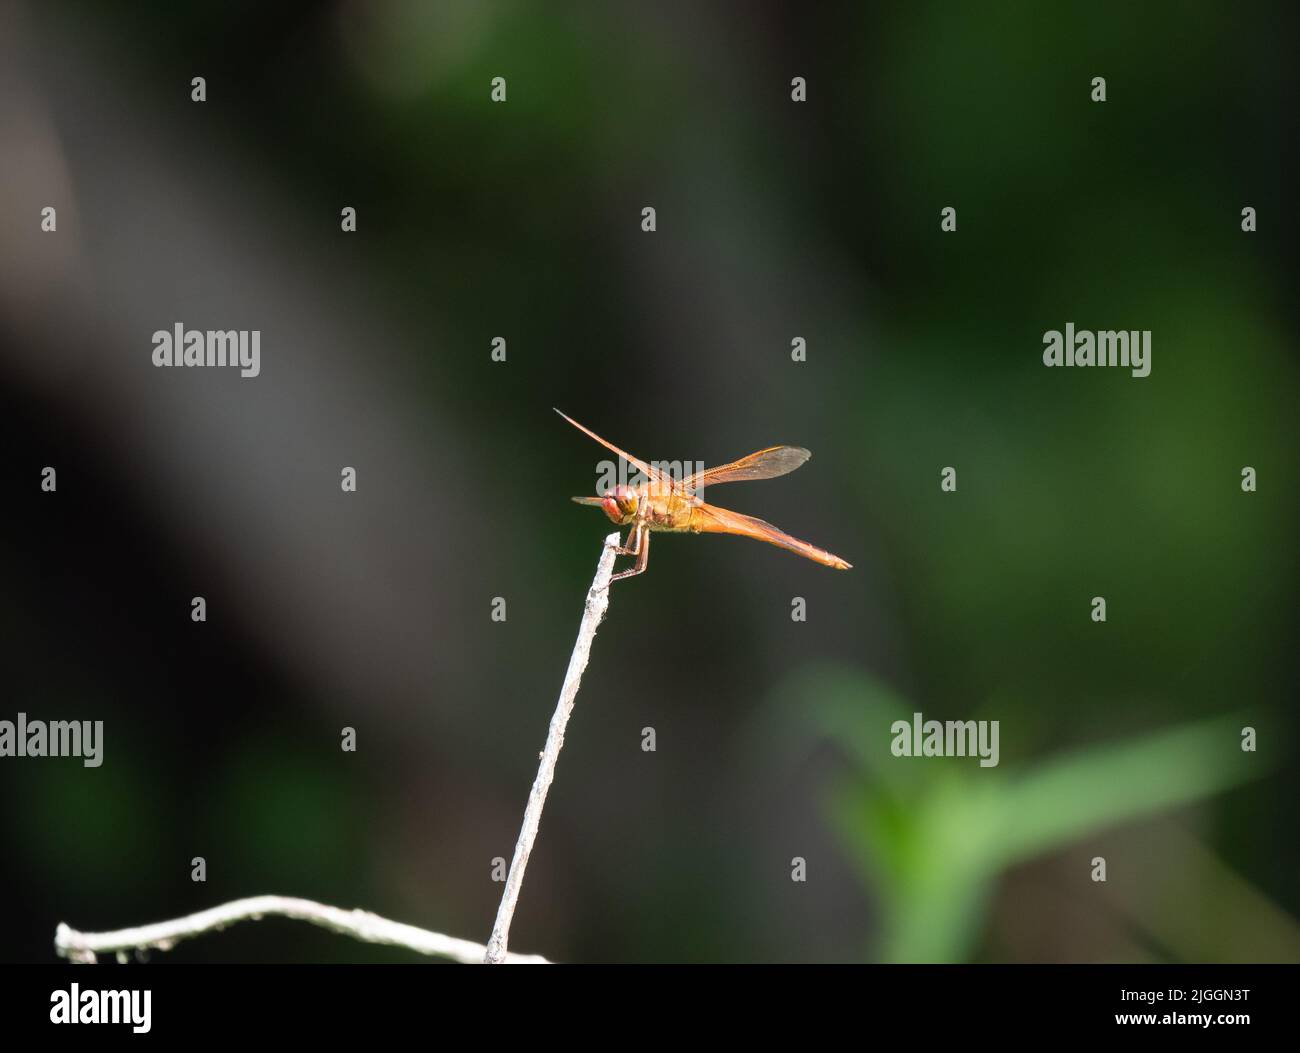 Sunlit golden-winged skimmer or Libellula auripennis dragonfly perched on a dried branch. Photographed in profile with a shallow depth of field and co Stock Photo